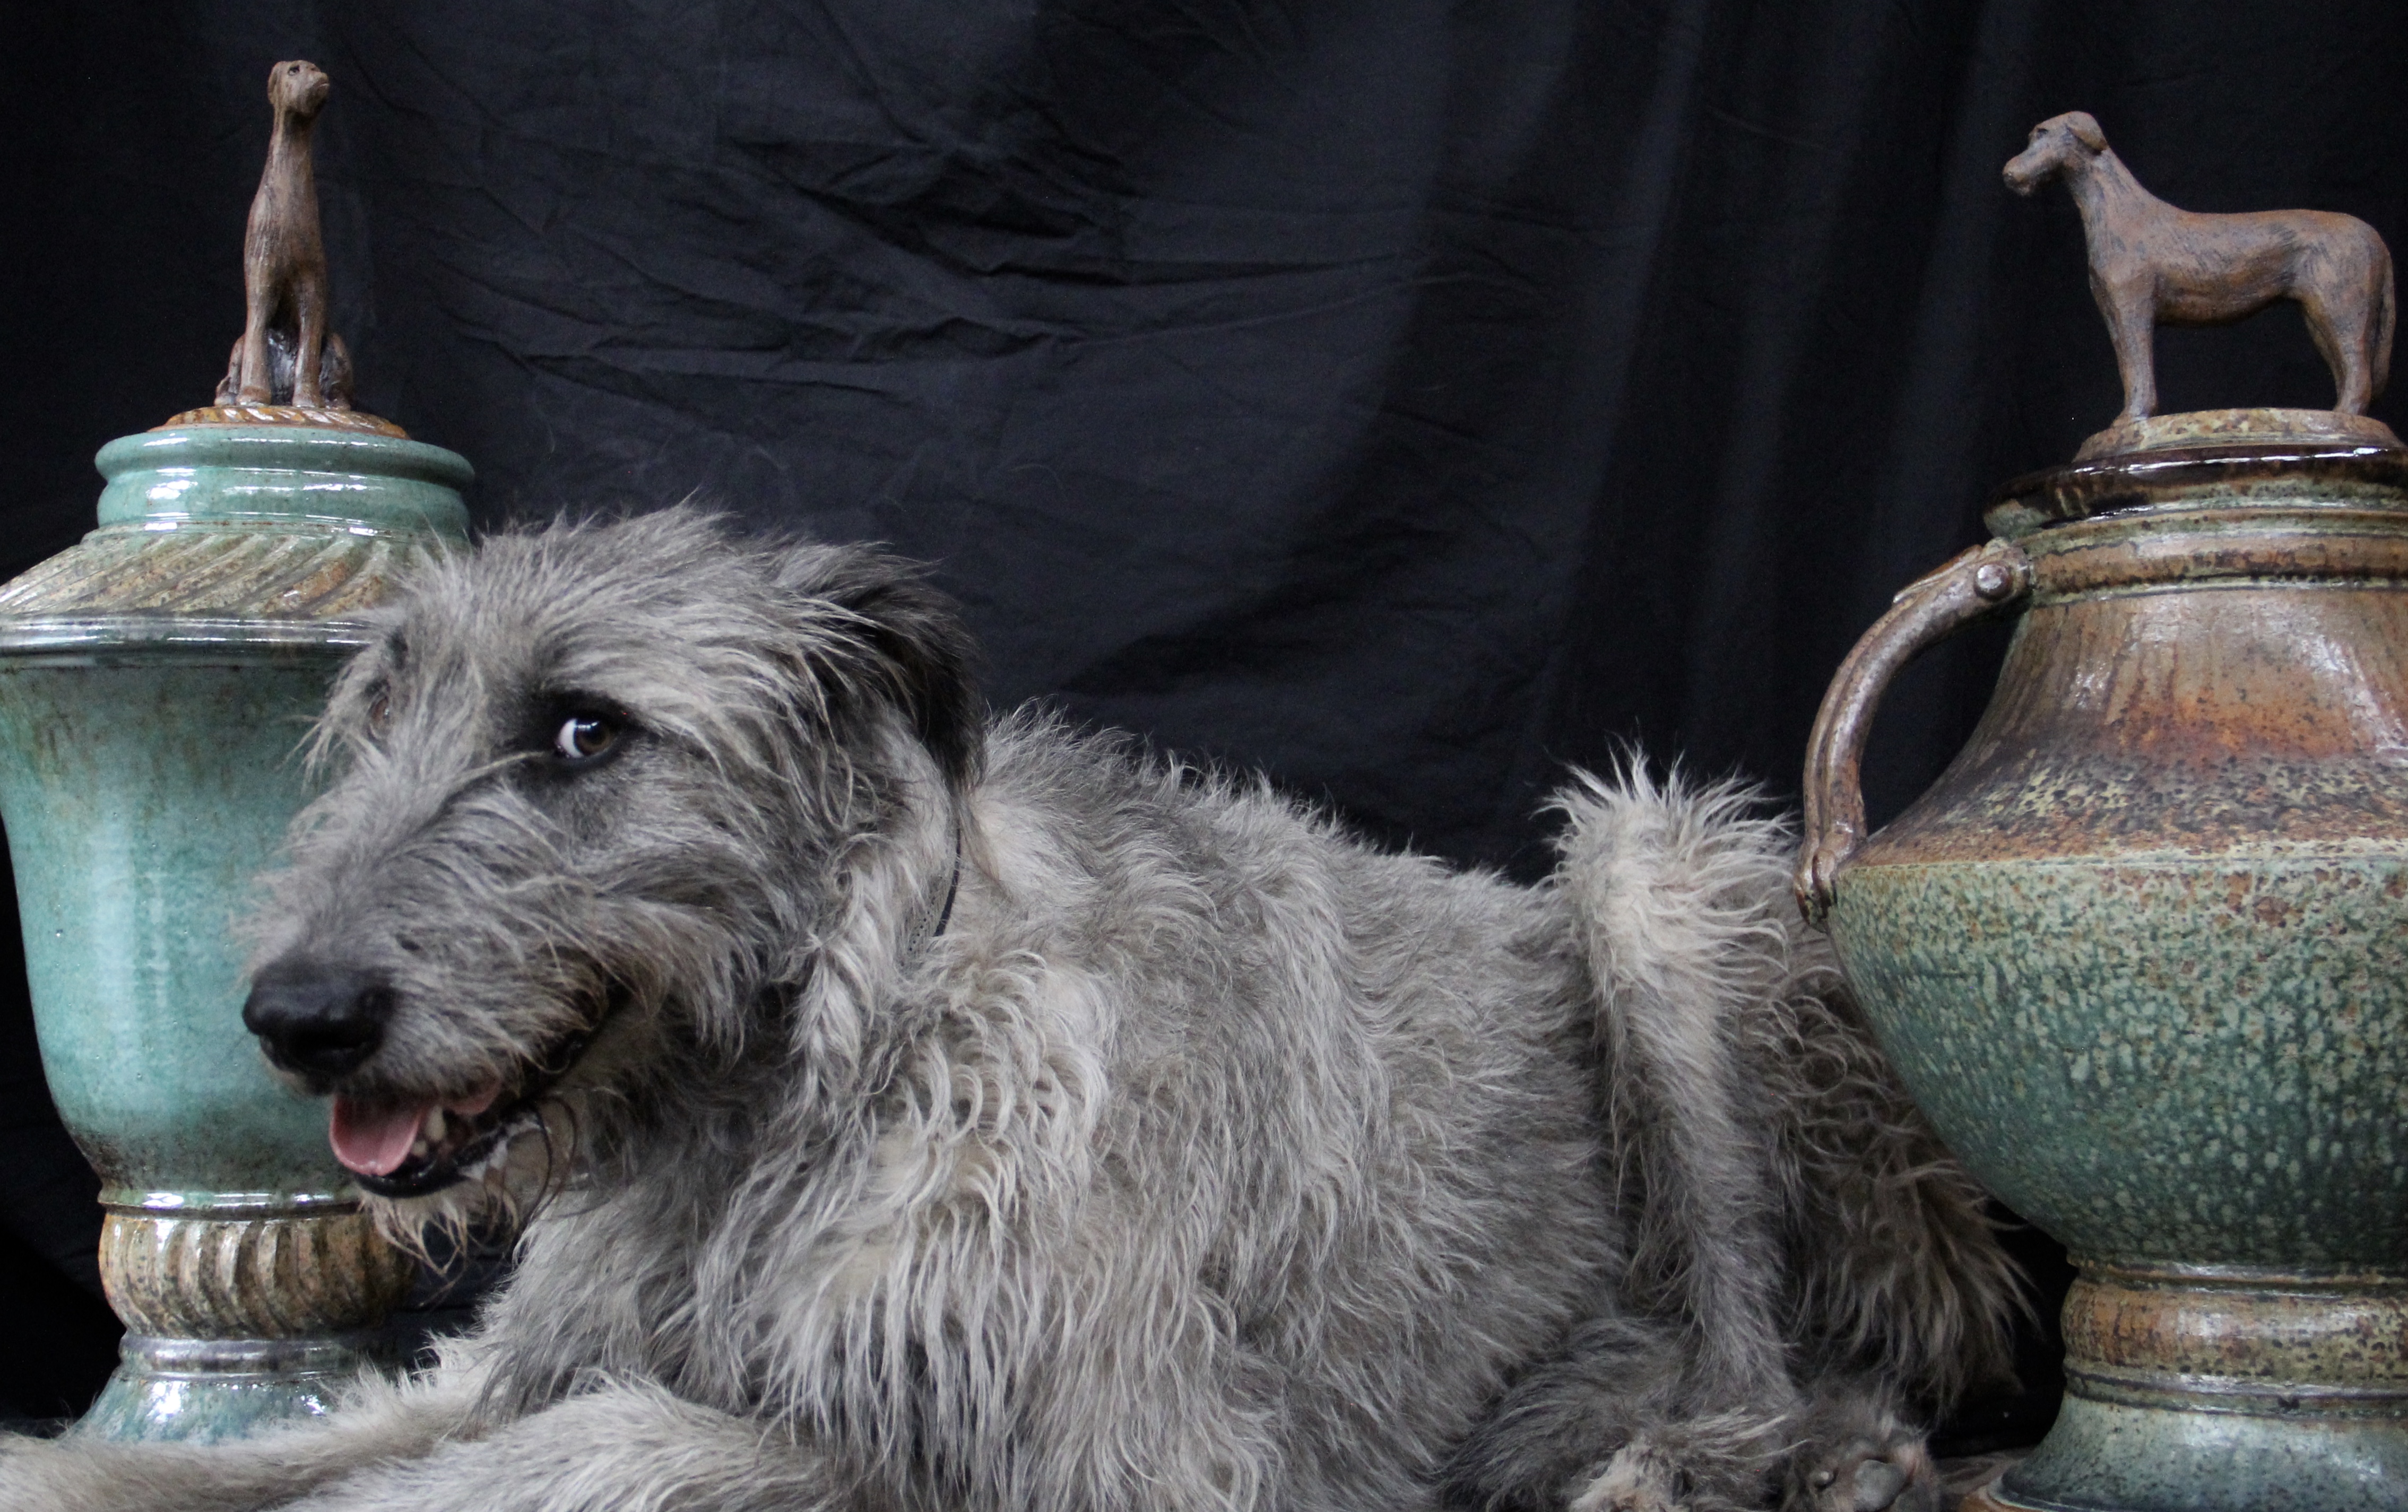 Atticus was one of 72 Irish wolfhounds that were part of a single massive rescue effort in Texas in 2014. These jars were made as donations in his honor.